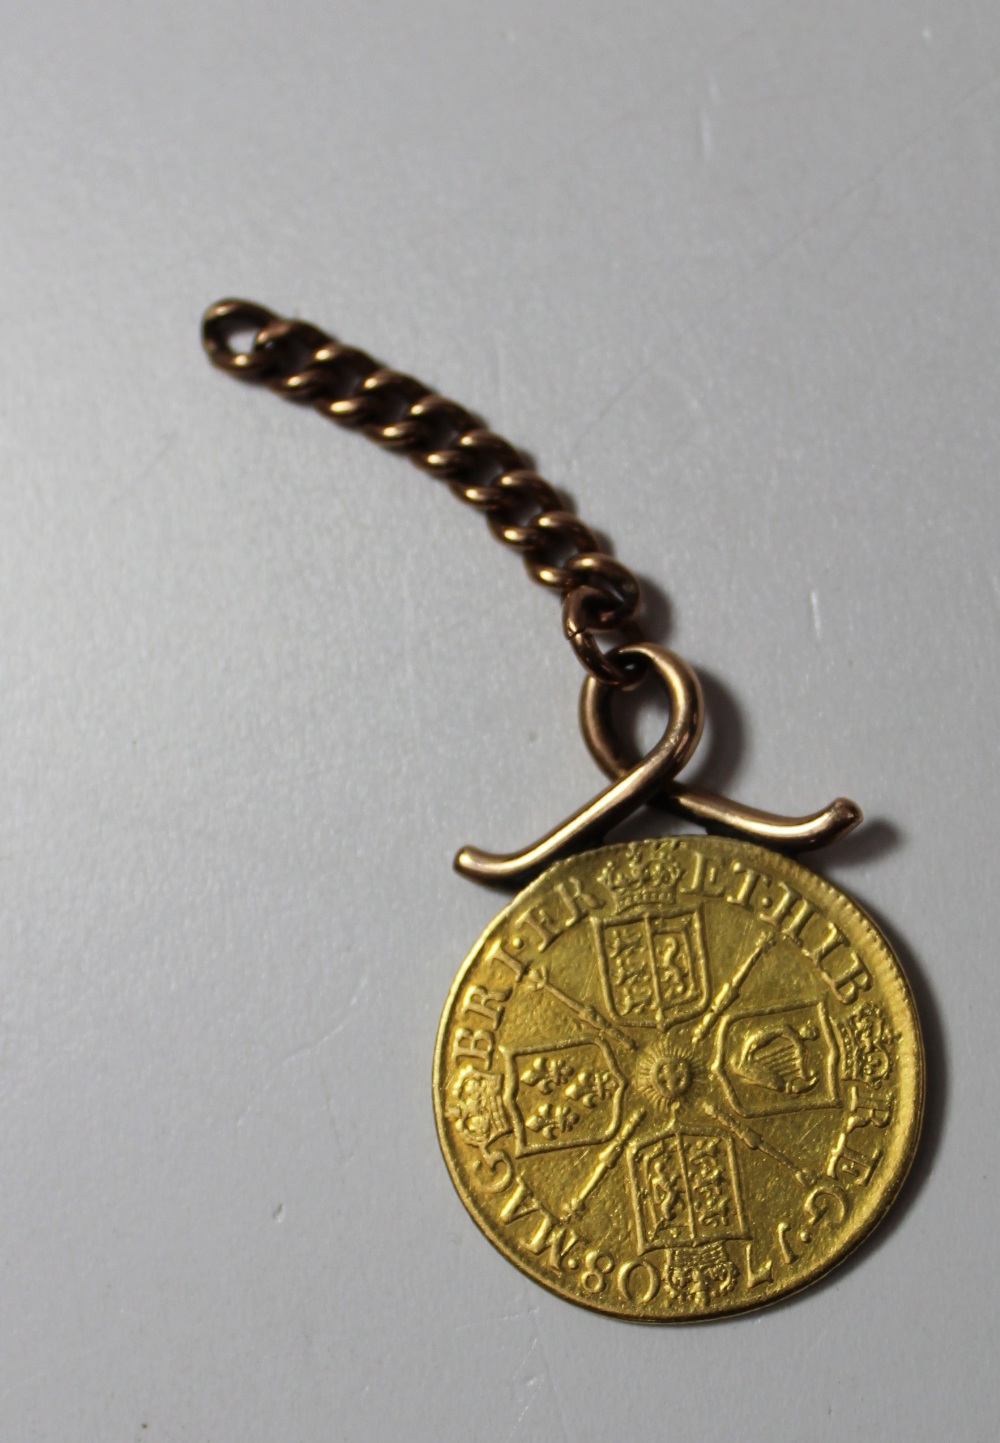 A Queen Anne gold Guinea dated 1708 mounted on a yellow metal ring and chain